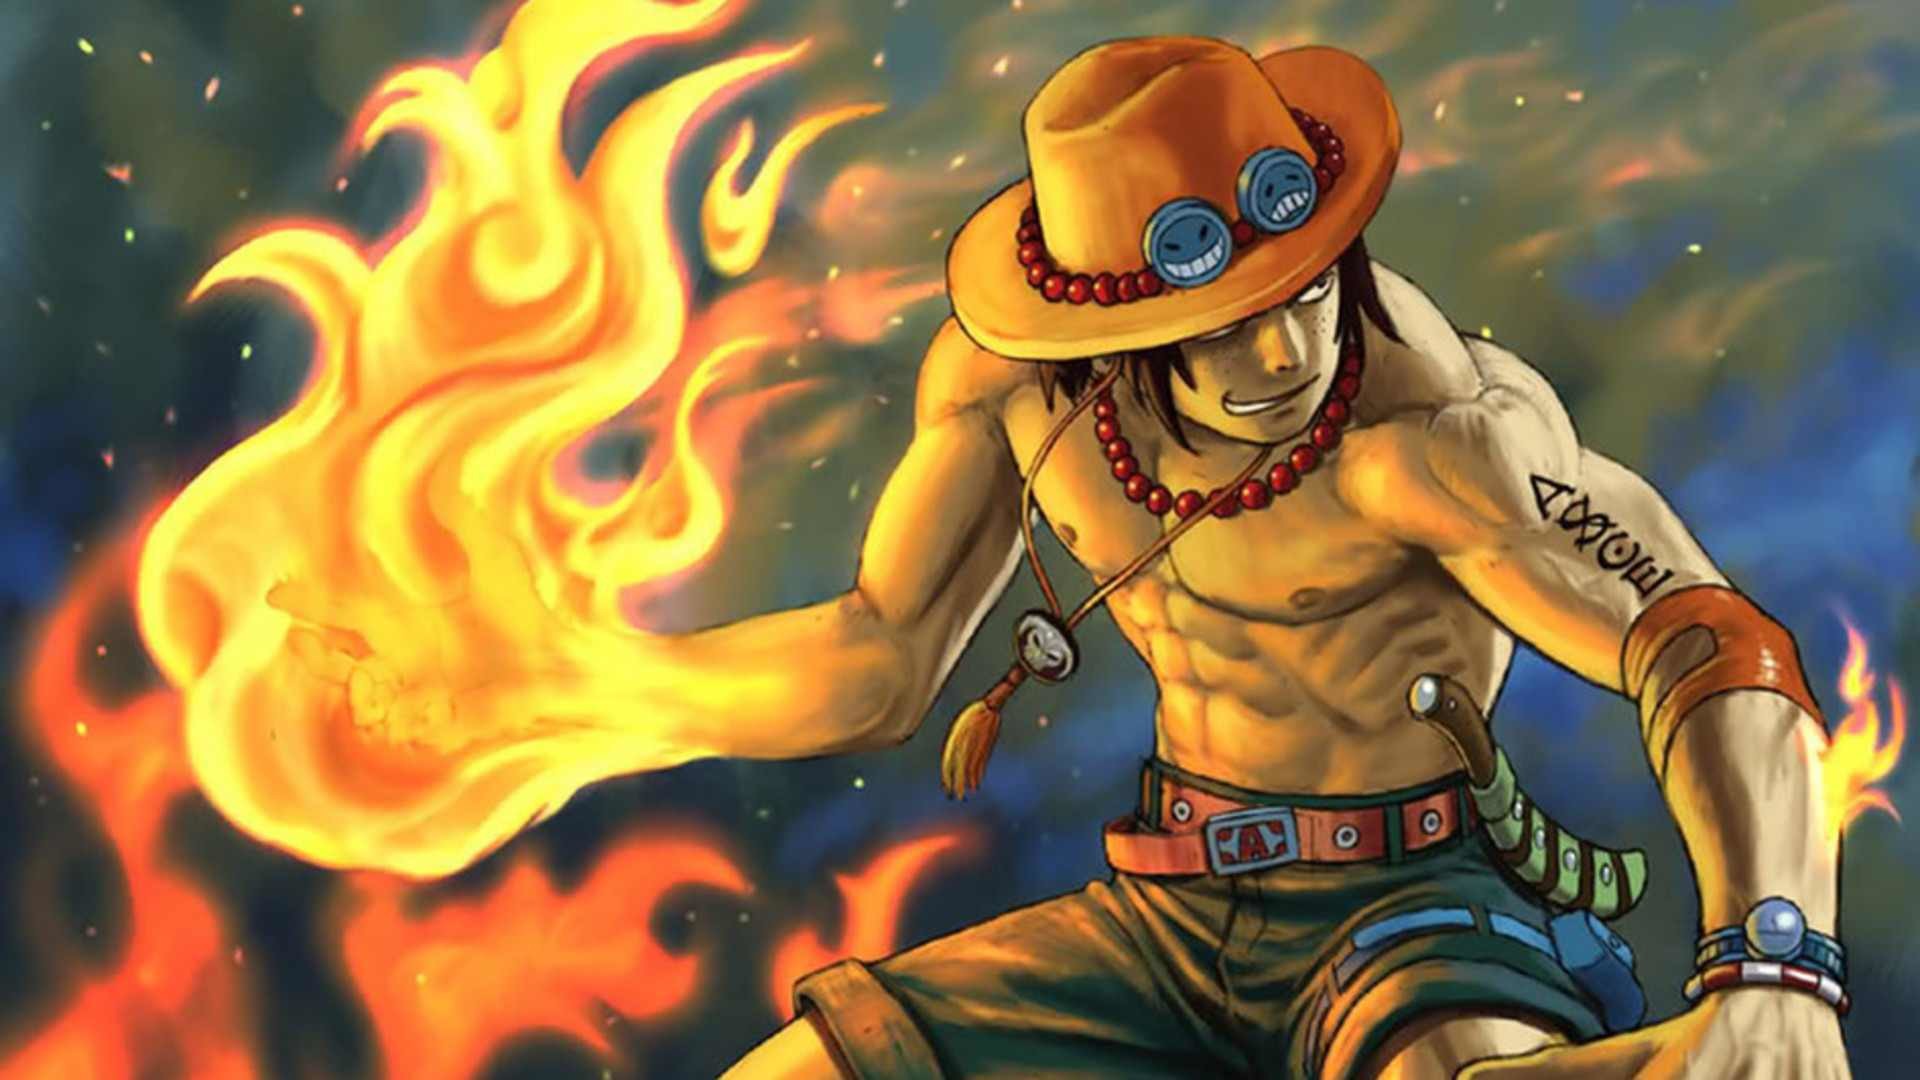 One Piece Ace Background Wallpaper Hd Wallpapers 1920x1080